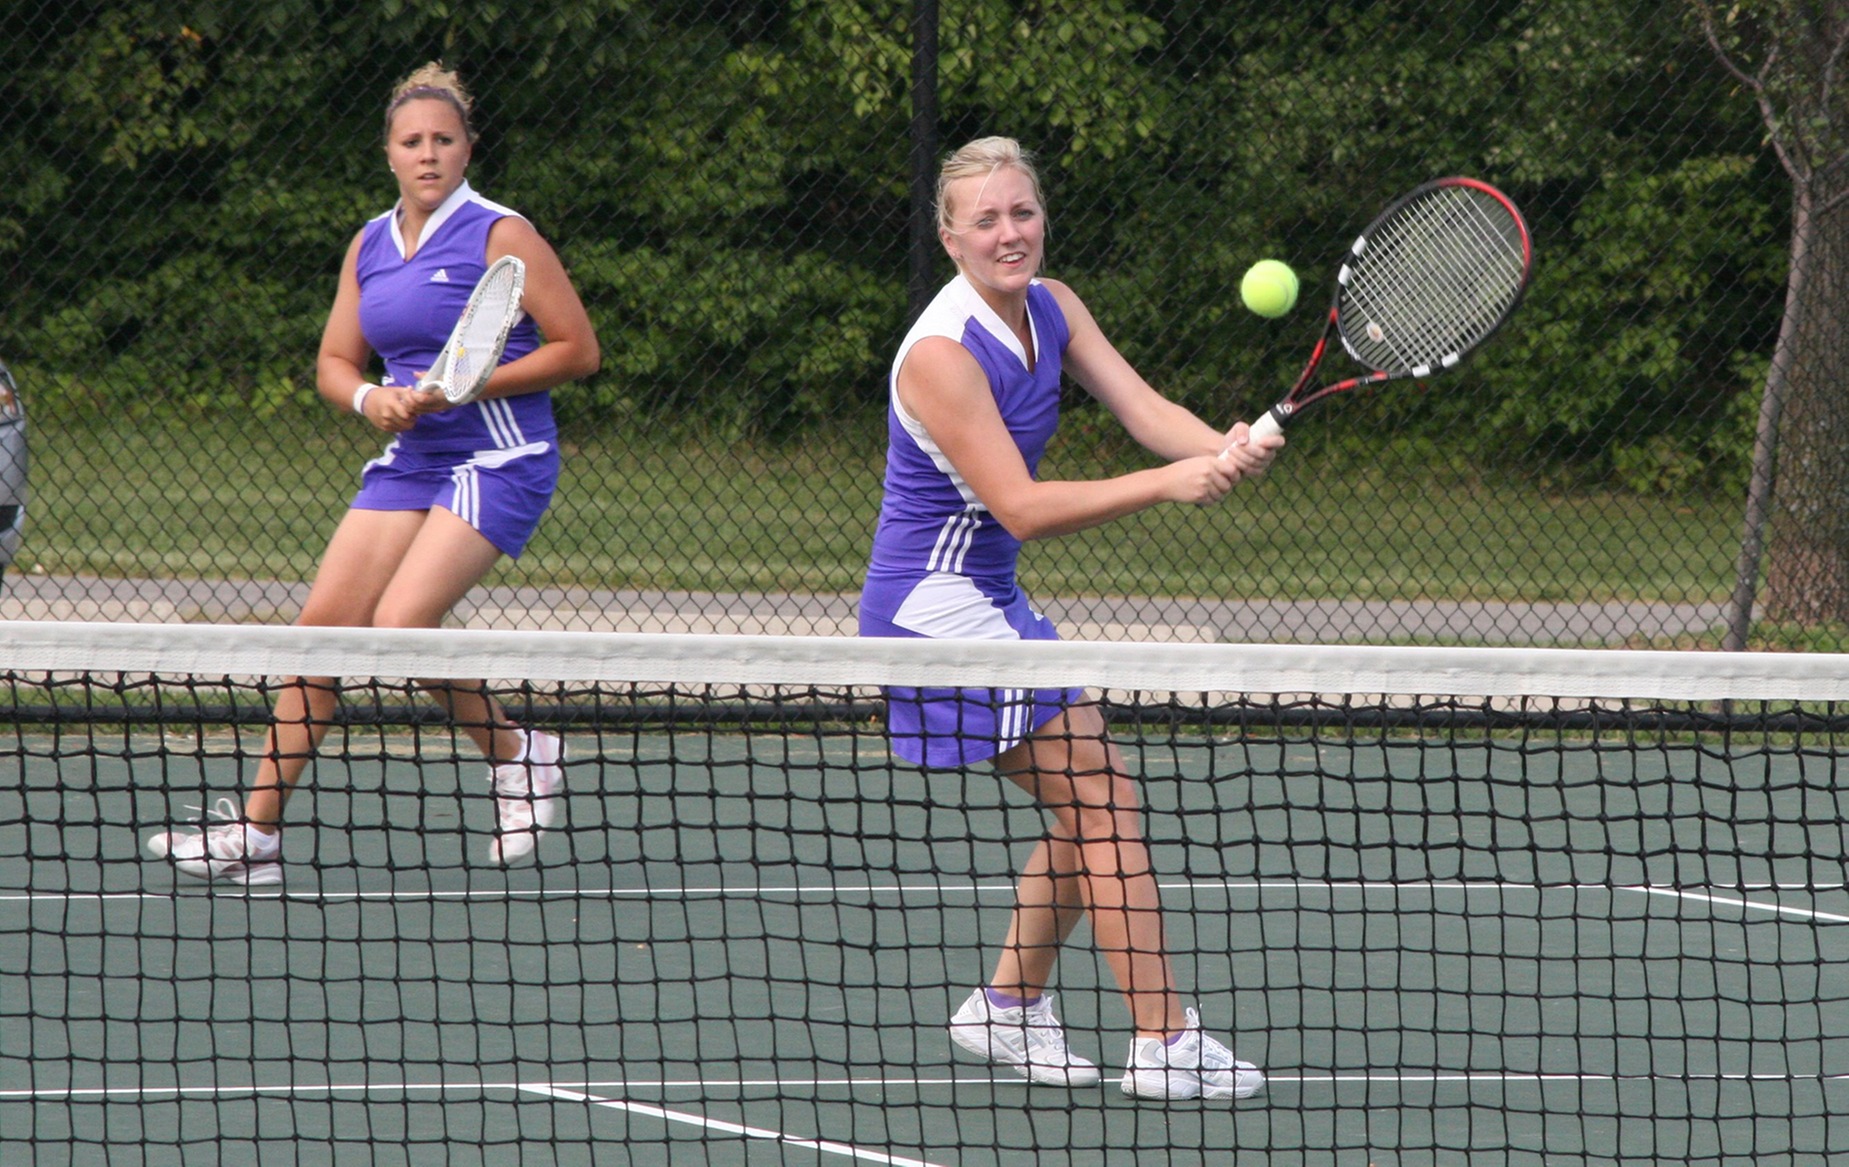 DC Duo Wins in No. 1 Doubles Action, Jackets Fall to Goshen